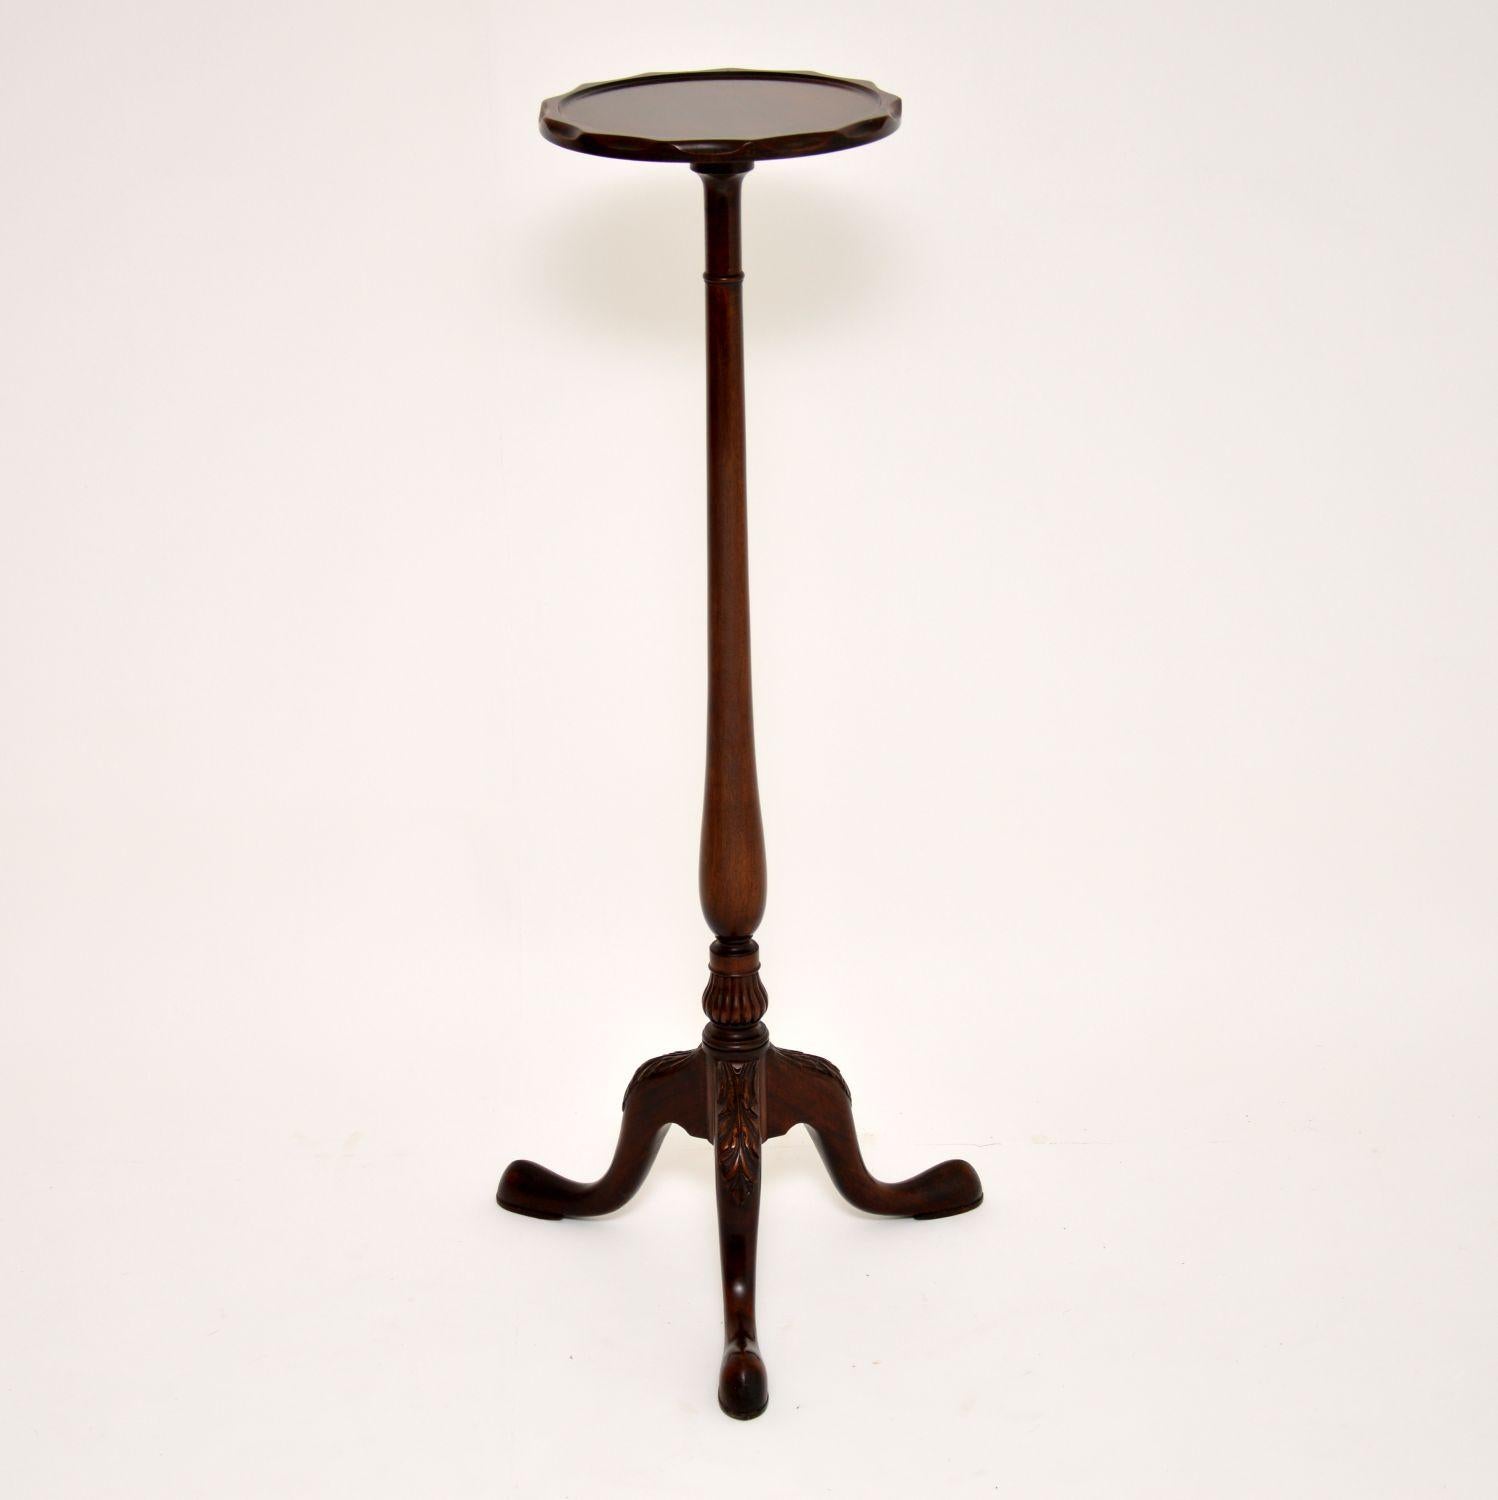 Fine quality antique torchere stand dating from the 1900-10 period & in excellent condition. It has an elegantly shaped turned column with fluting at the base & well carved tripod legs with pad feet.

Measures: Width base – 19 inches, 49 cm
Width